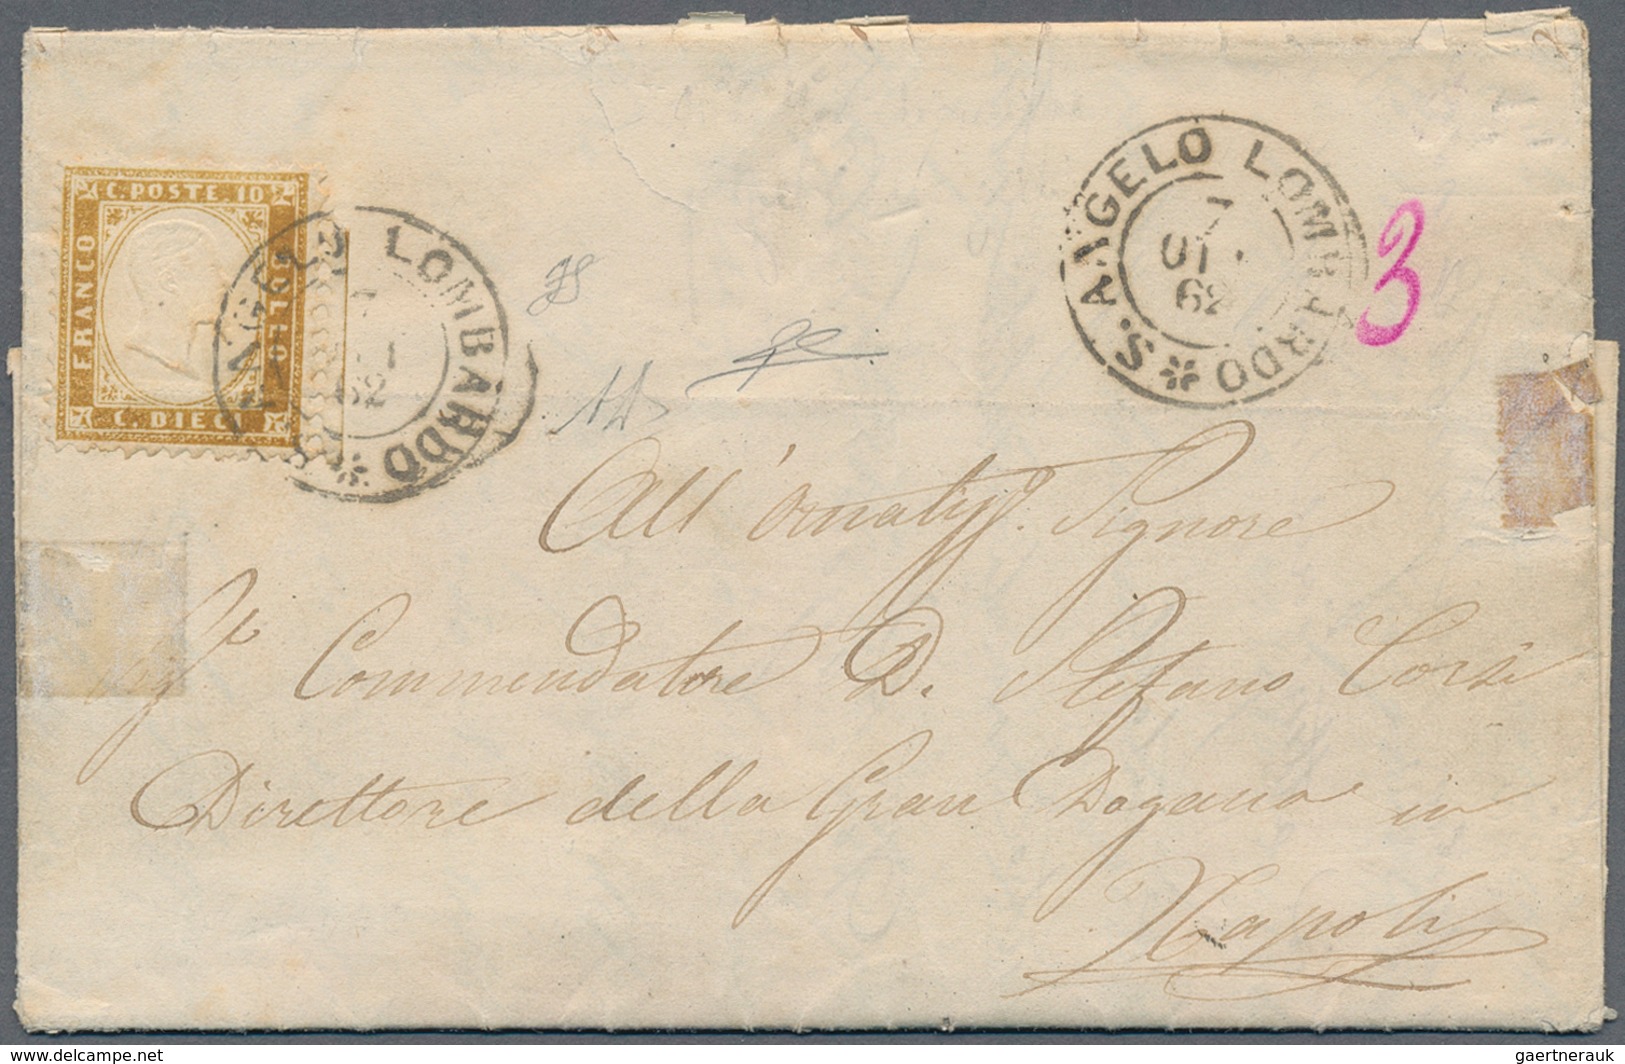 Italien: 1862, Viktor Emanuel 10 C Brown-yellow (bistro Giallastro) On Cover Sent From "ST.ANGELO LO - Mint/hinged